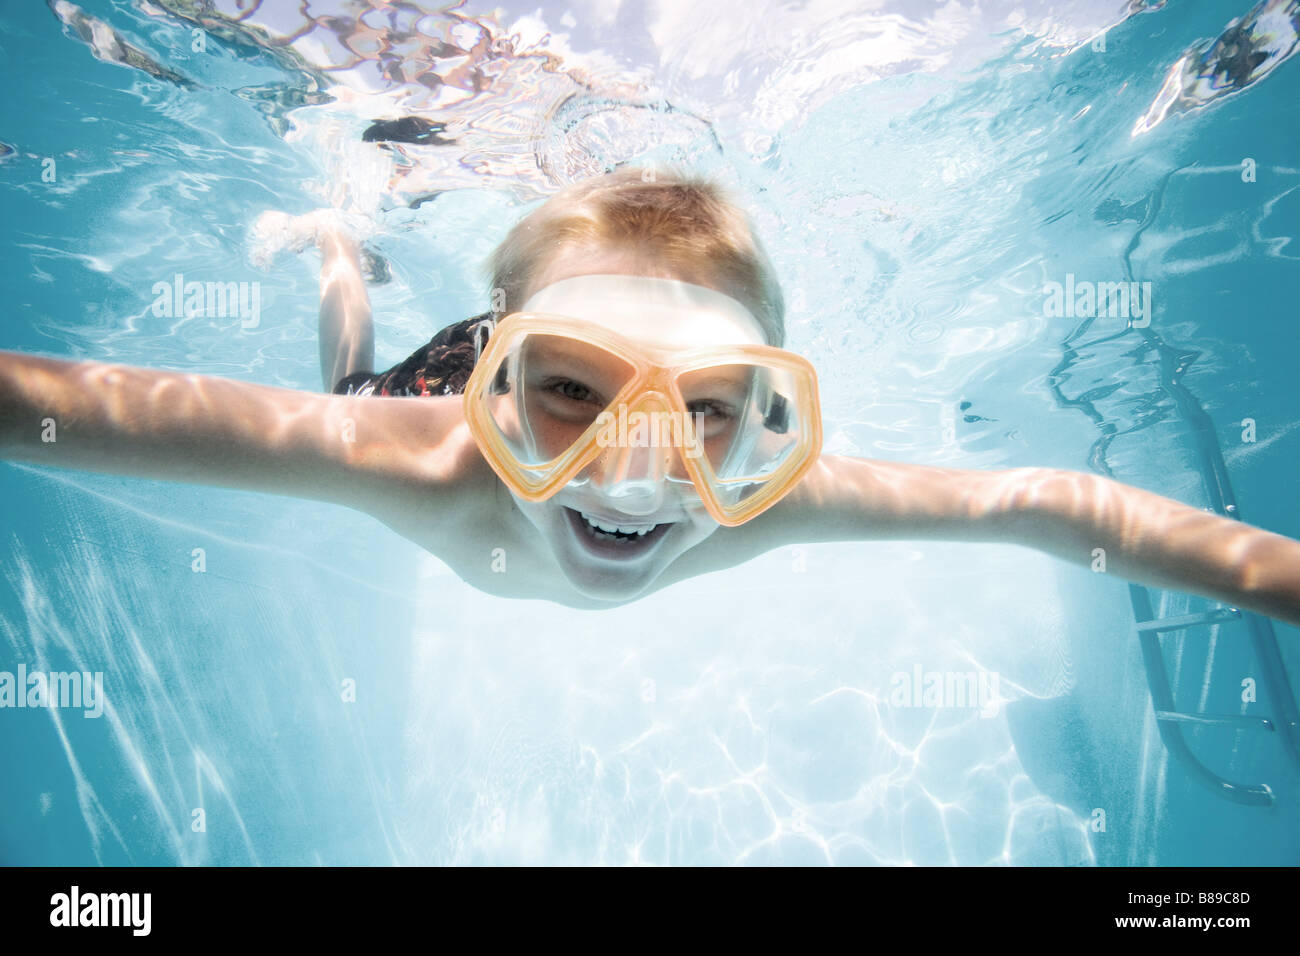 Boy swimming underwater Banque D'Images